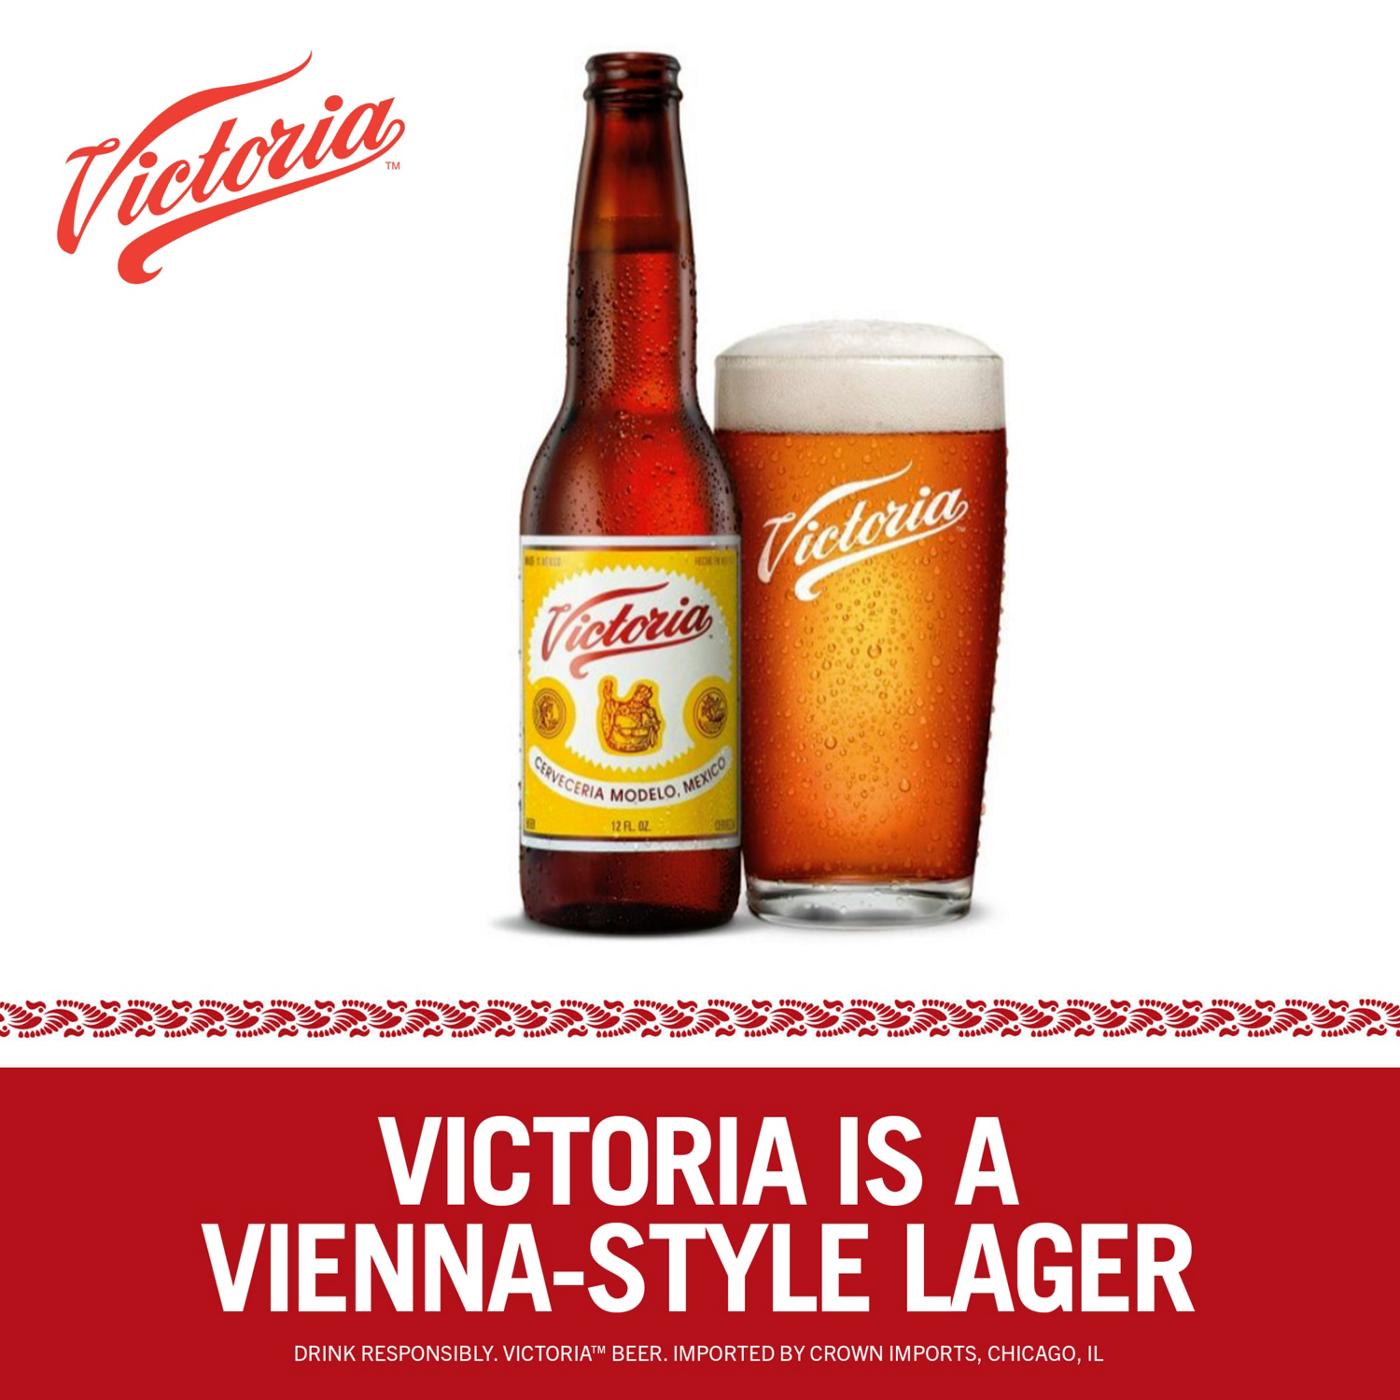 Victoria Amber Lager Mexican Beer 12 oz Bottles, 6 pk; image 8 of 8